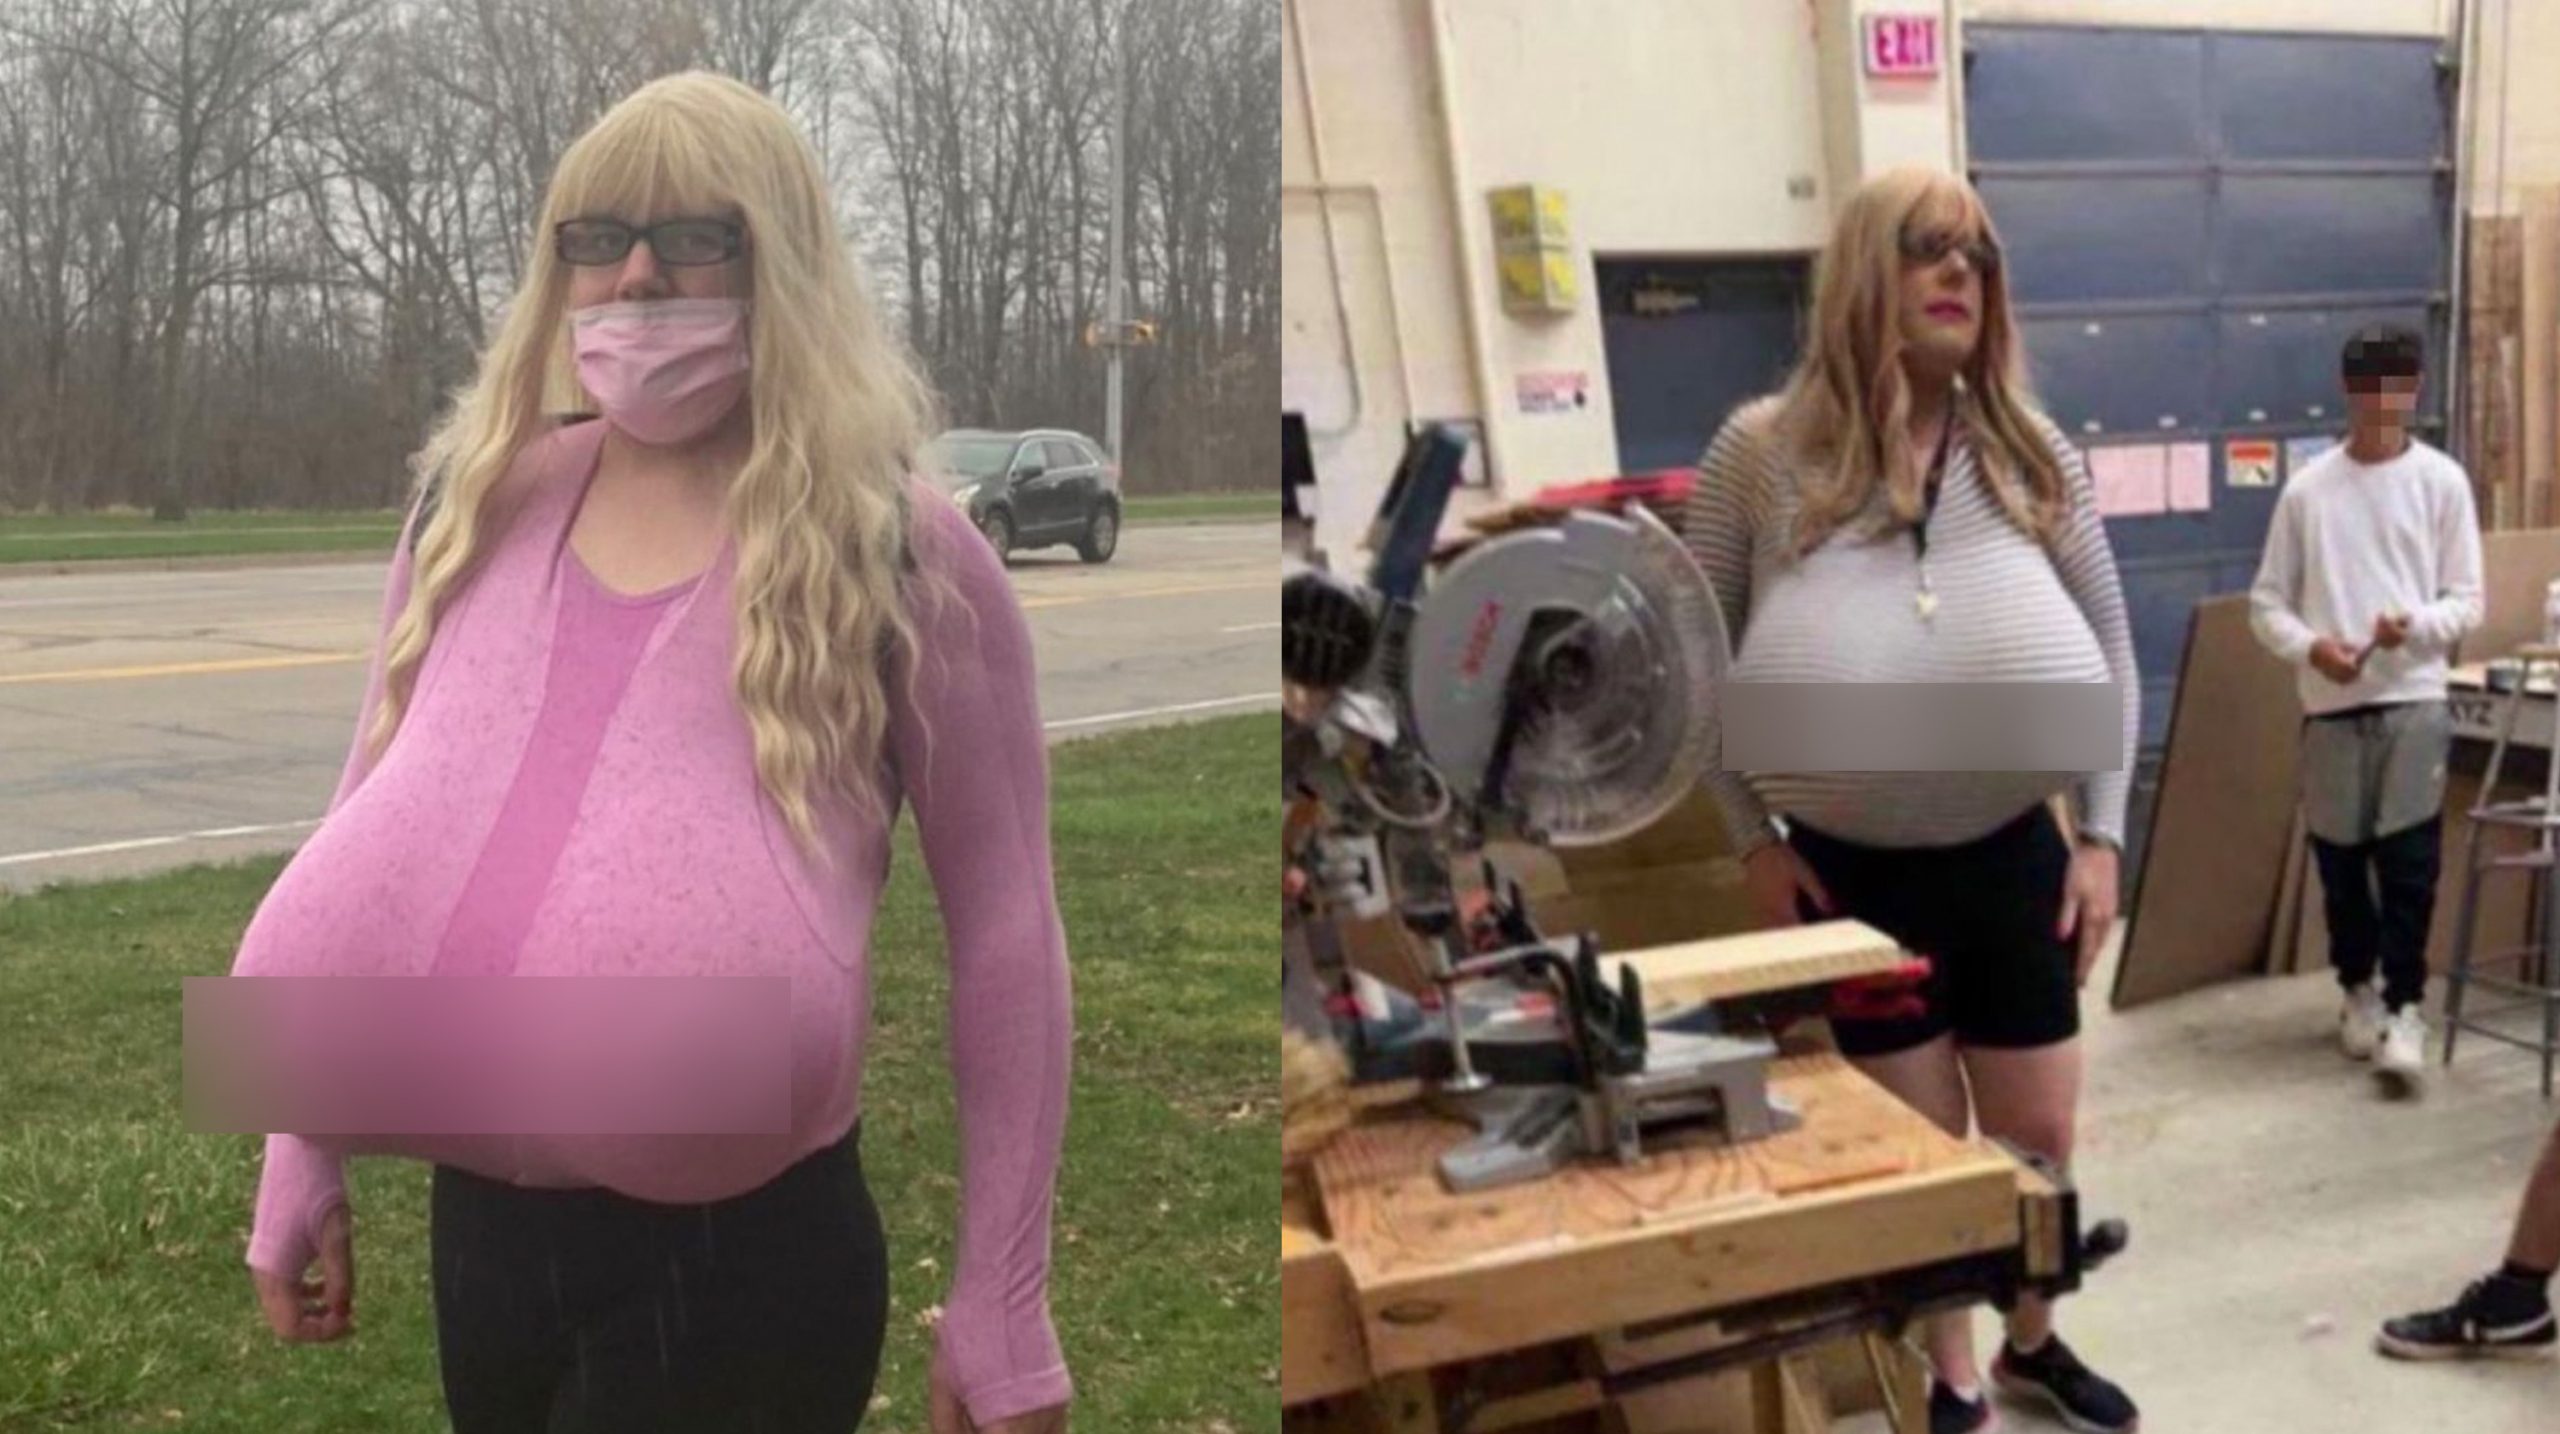 The Trans Teacher With The Enormous Z Cup Breasts Returns To Classroom At New School